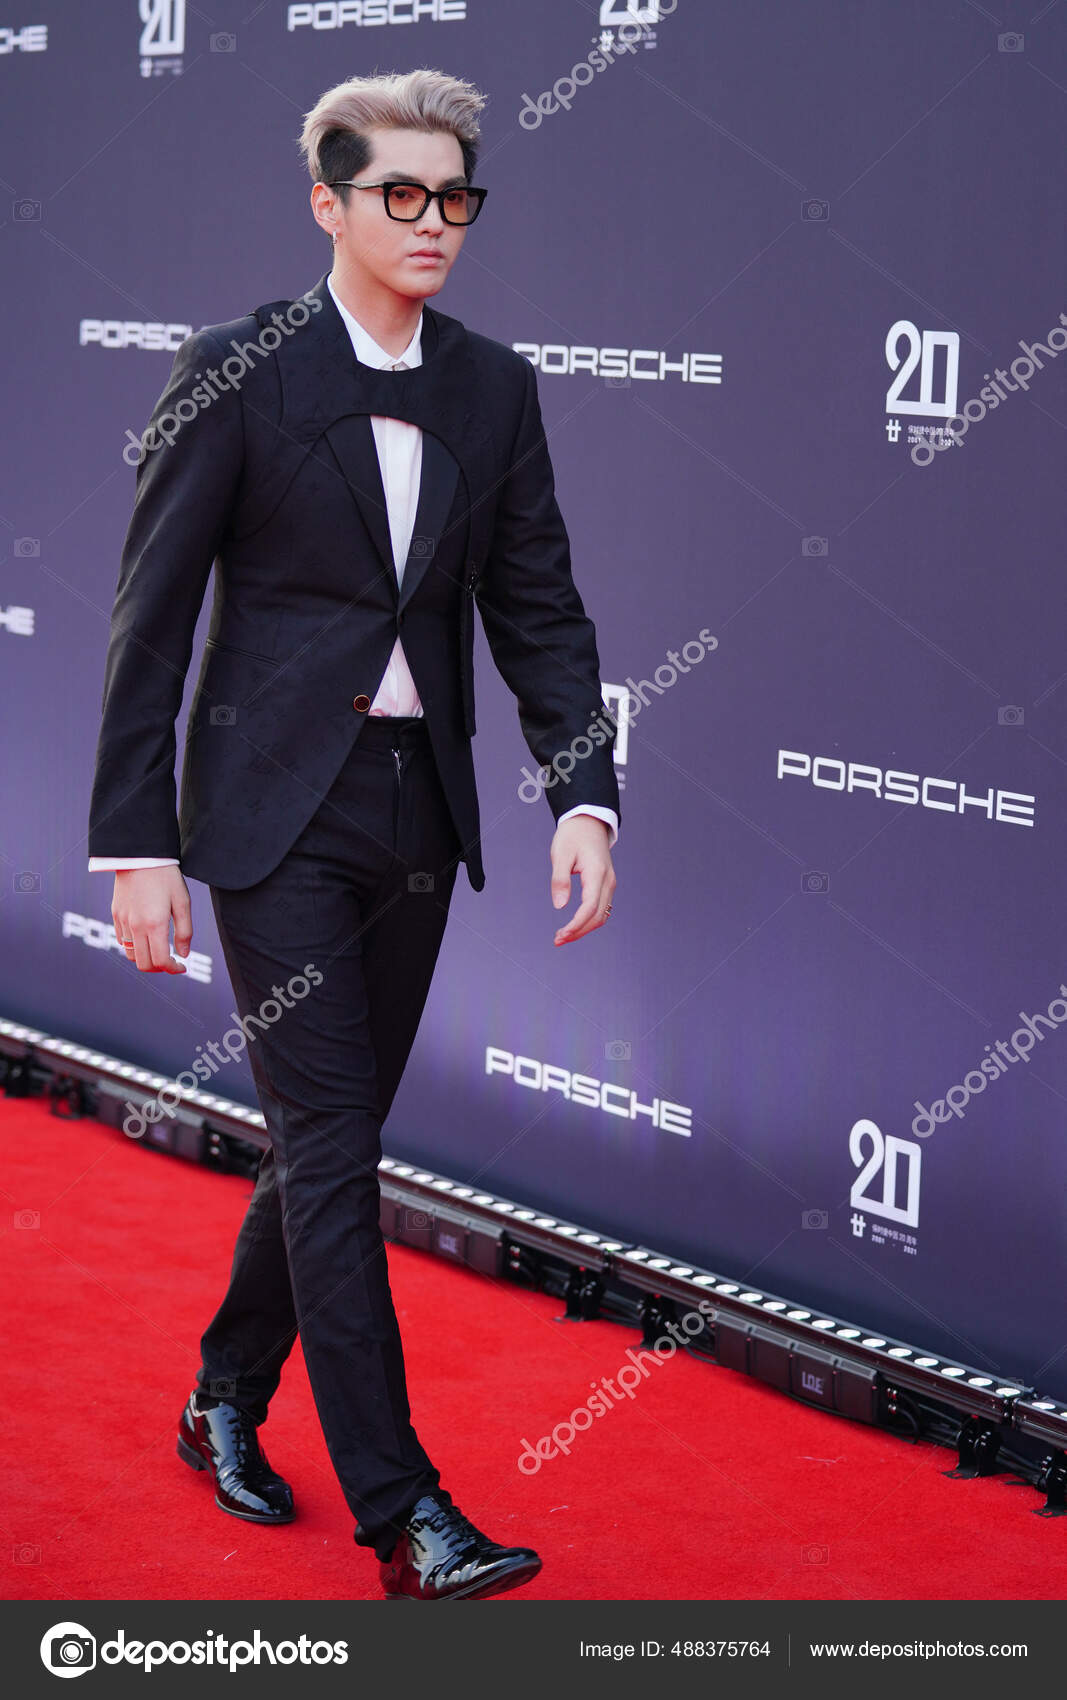 Canadian Actor Rapper Singer Record Producer Model Kris Attends Year –  Stock Editorial Photo © ChinaImages #488375662